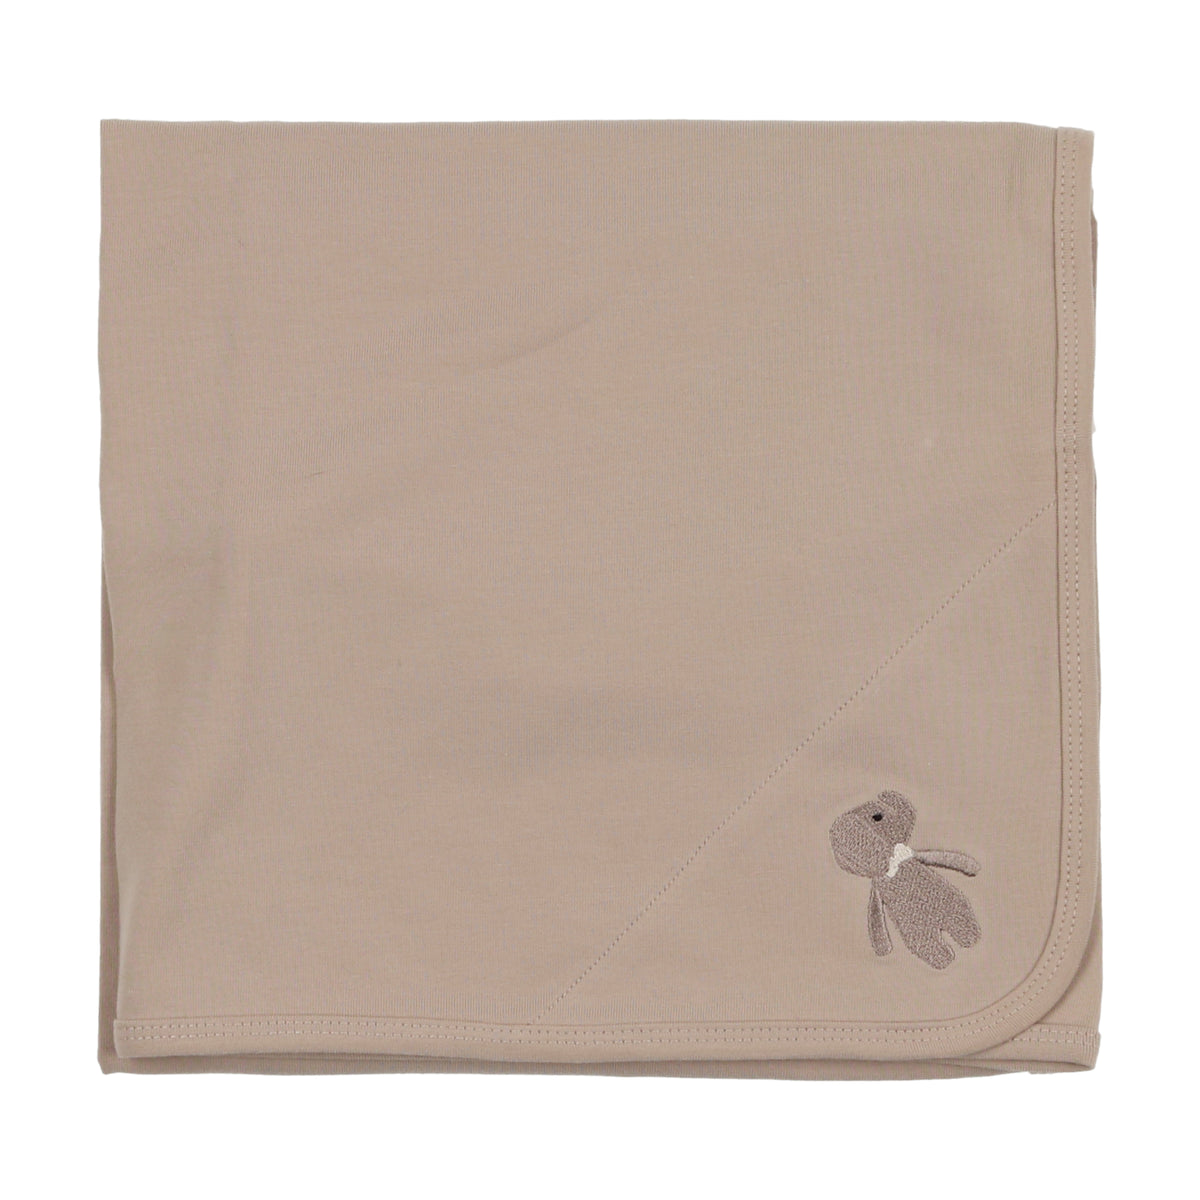 Embroidered Cotton Blanket